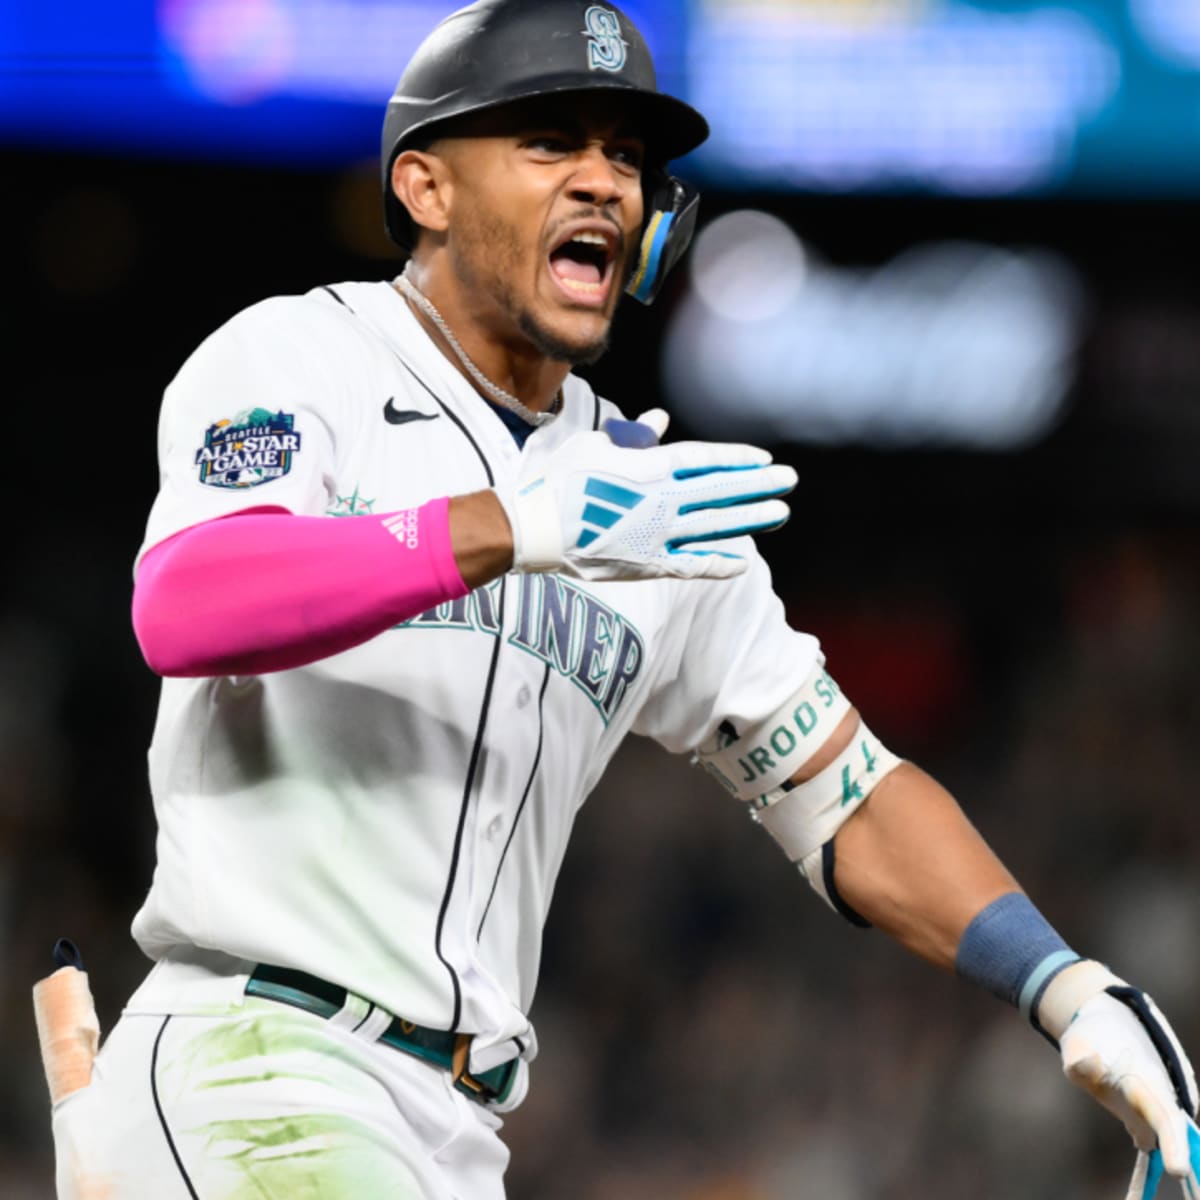 Mariners' Julio Rodriguez Joins 30-30 Club With Electric, Game